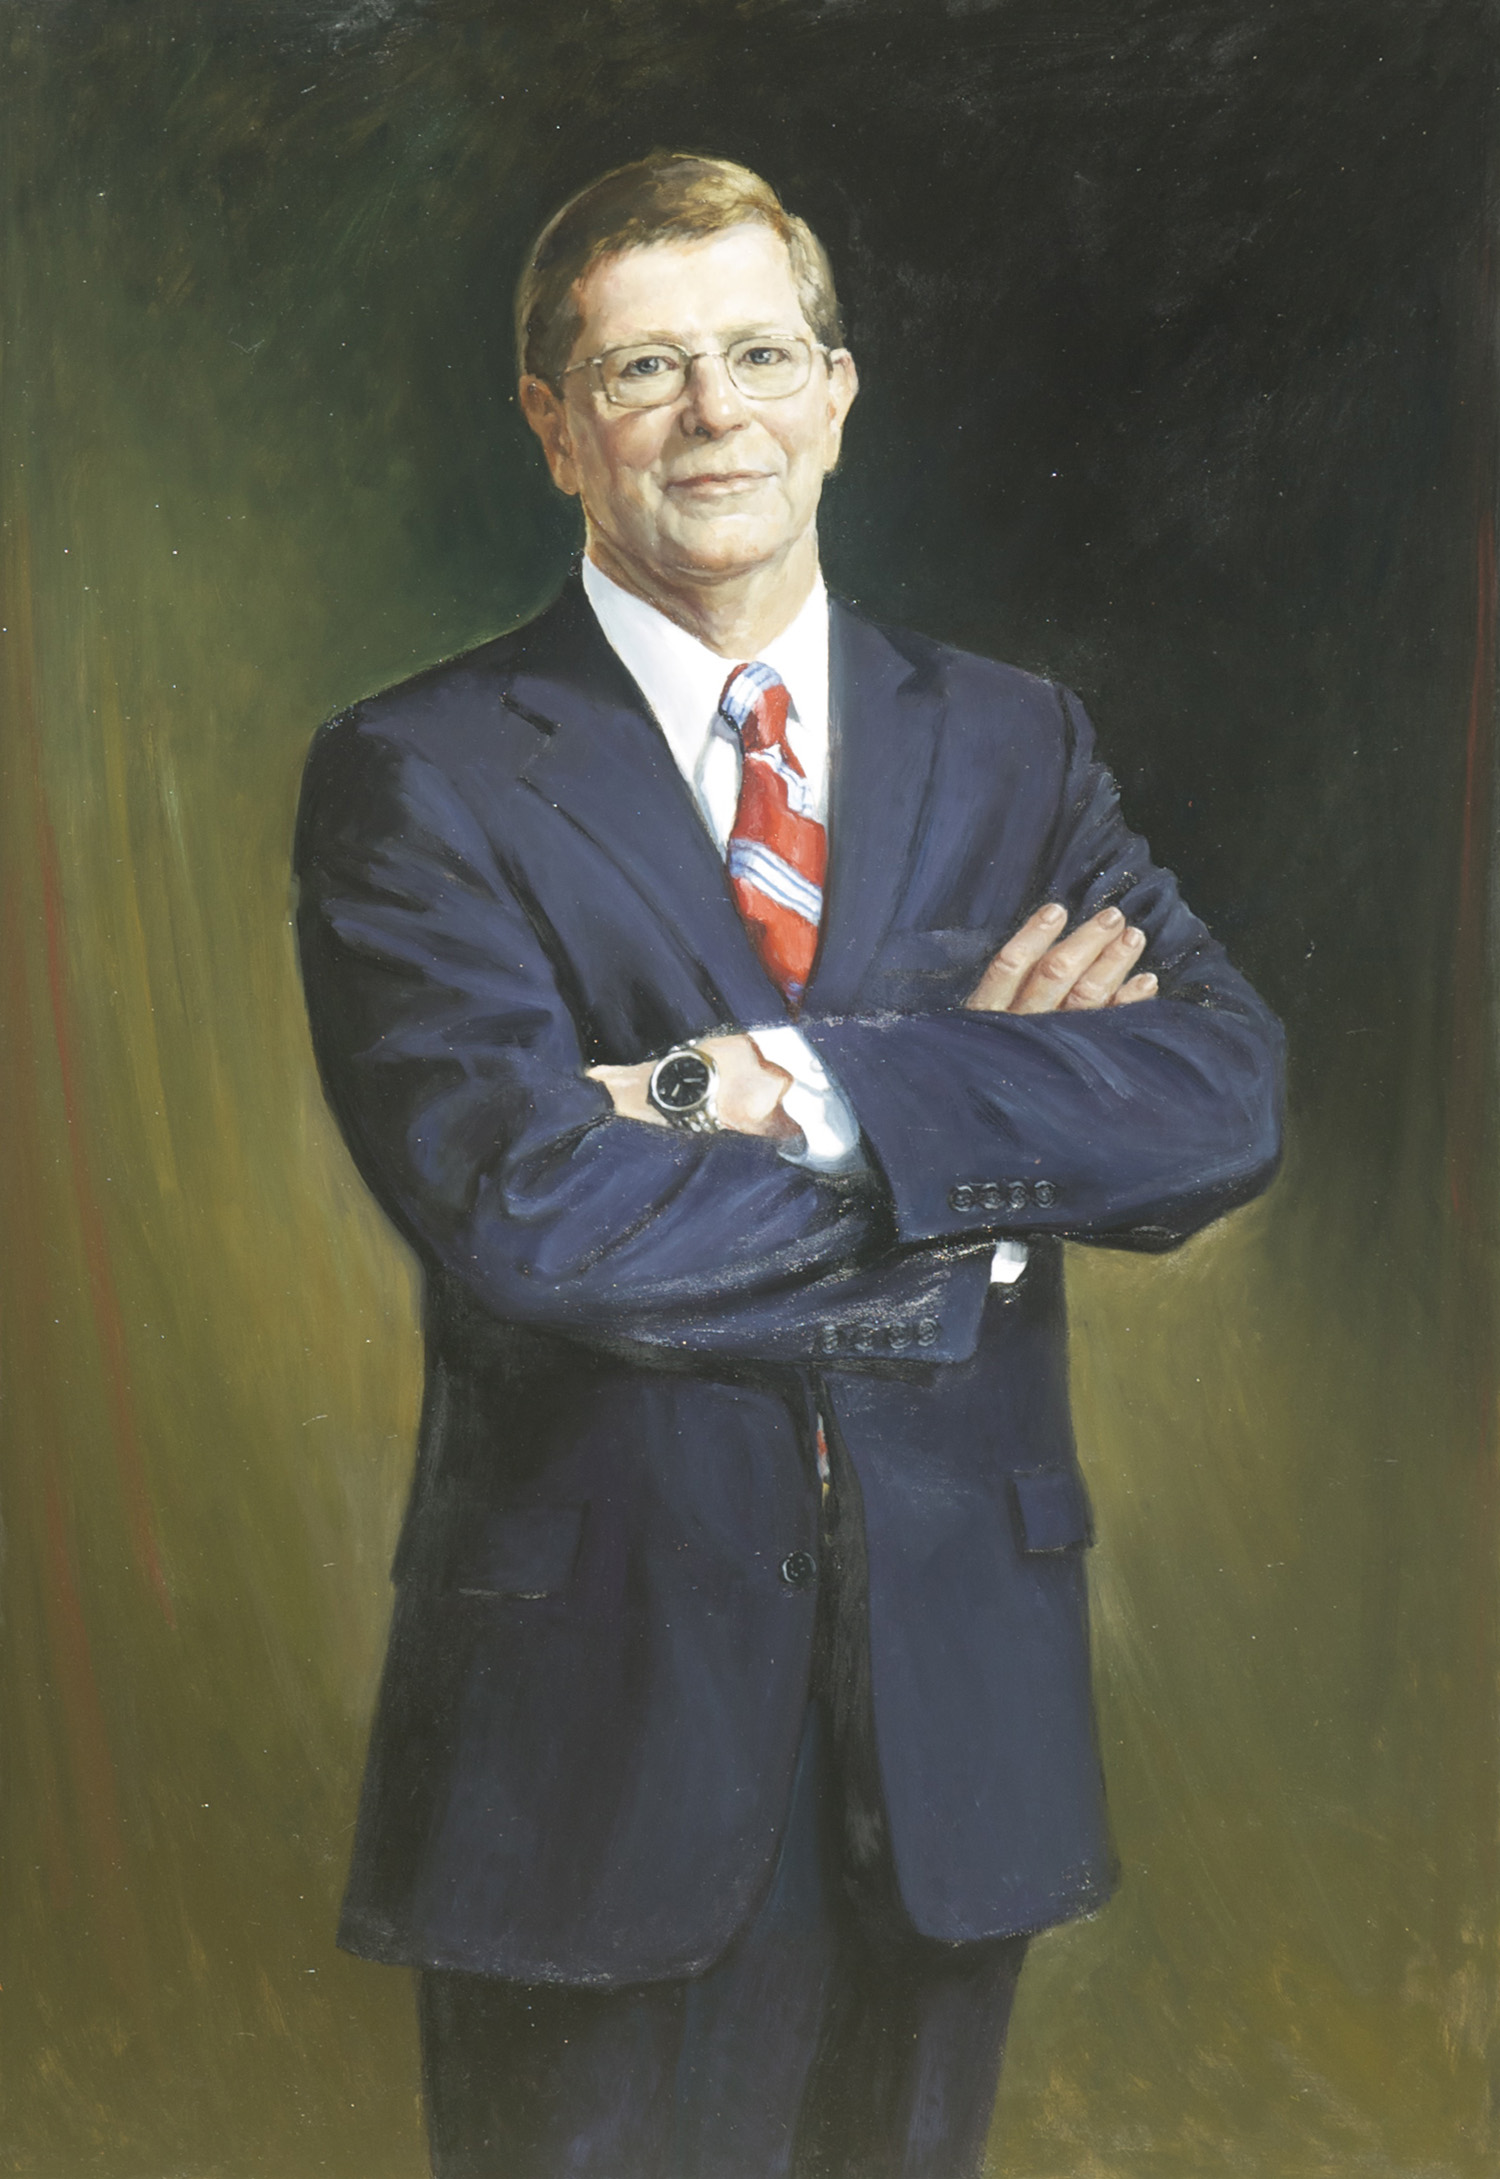 Mike Middleton, Pres. Community Bank of the Chesapeake, 30" x 50". Commission.